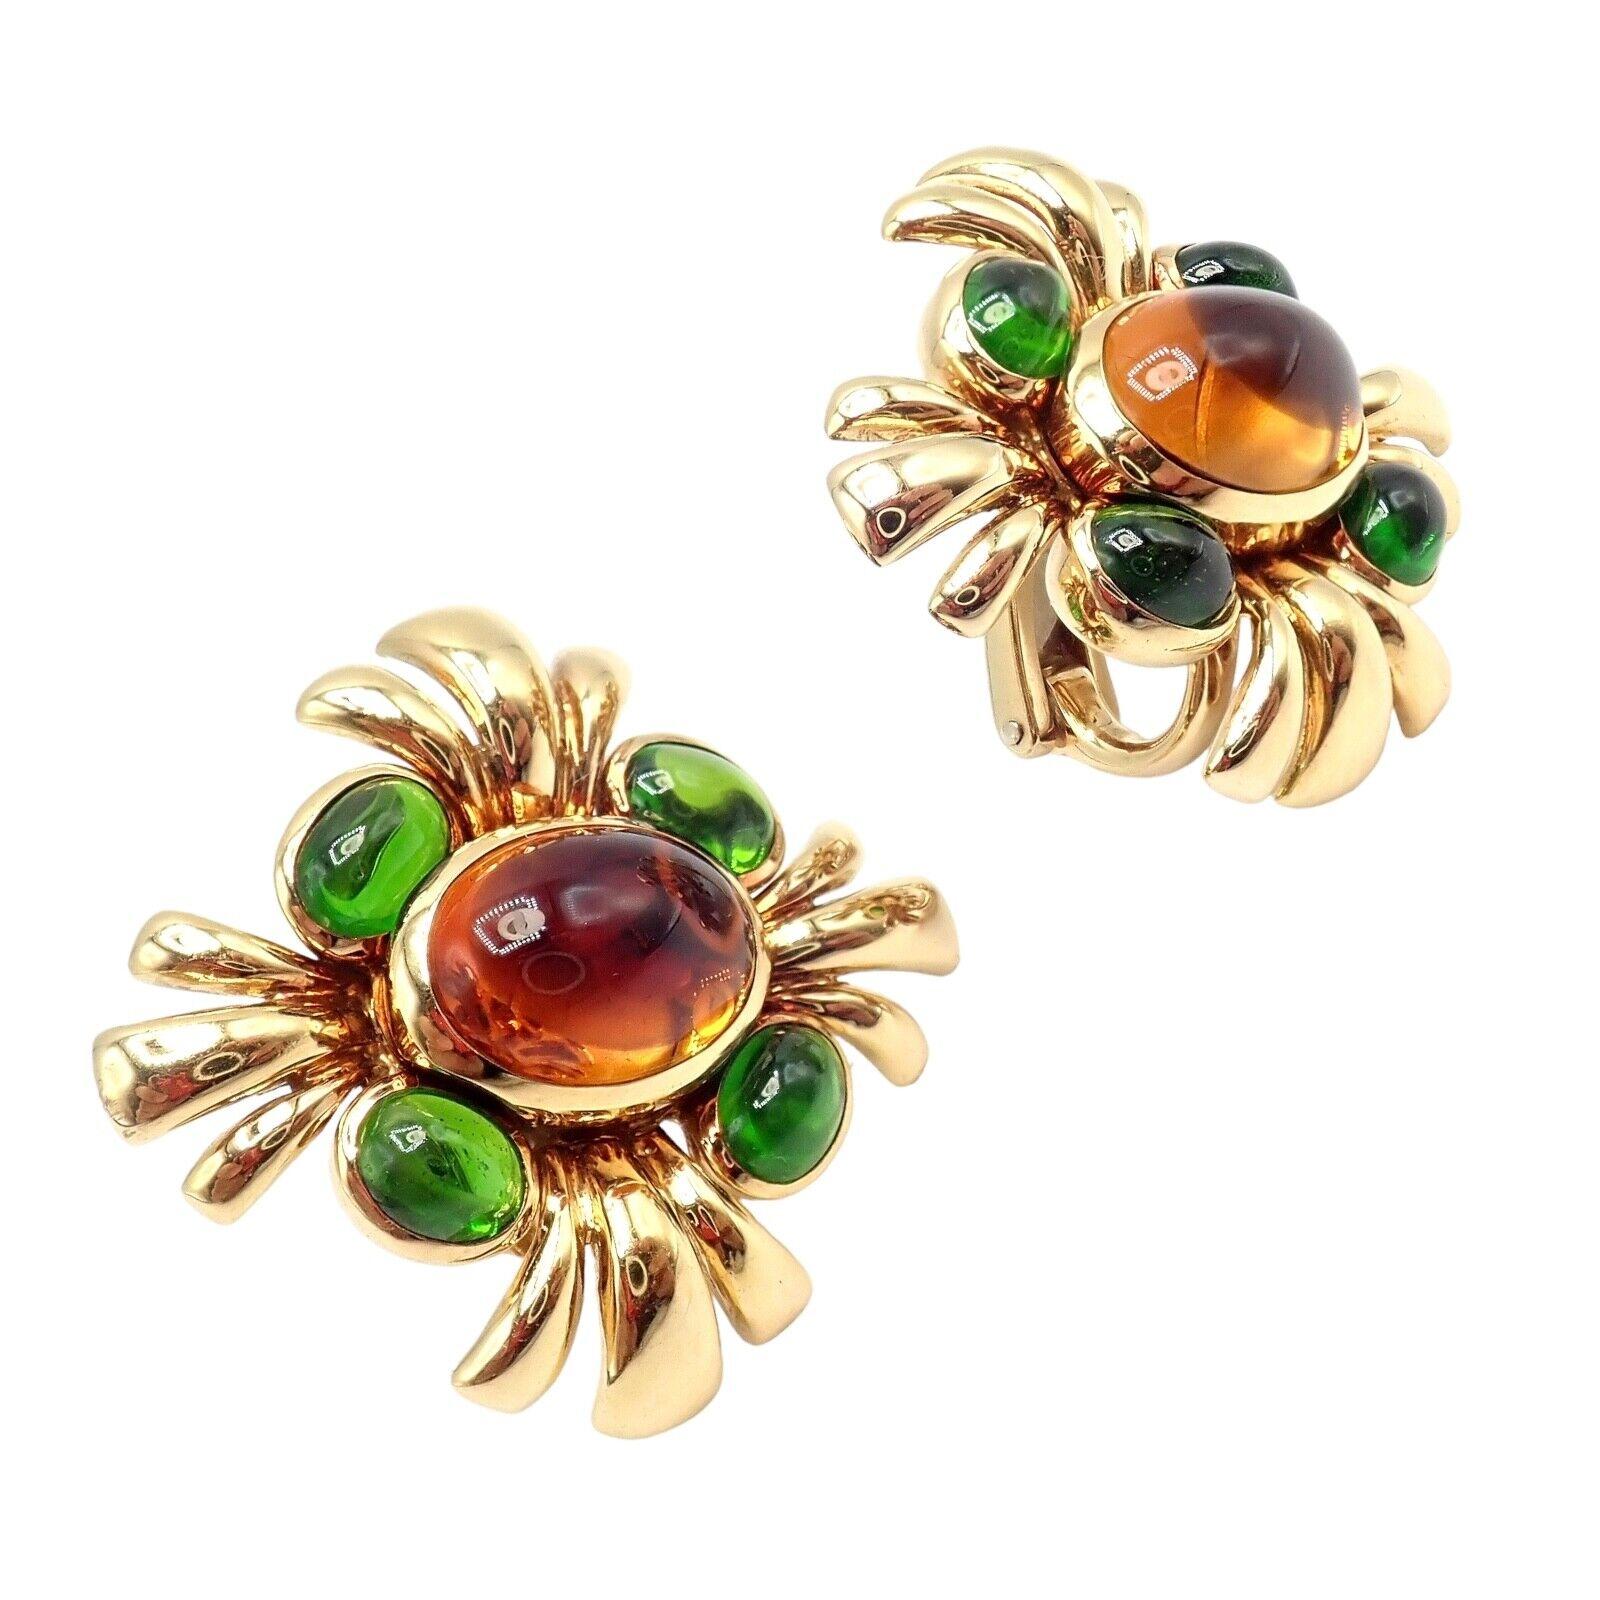 18k Yellow Gold citrine and green tourmaline vintage earrings by Verdura. 
With 18 cabochon green Tourmalines 4mmx6mm
2 cabochon Citrines 8.5mm x 11mm
These earrings are made for non-pierced ears. New padding added for comfort and security.
The